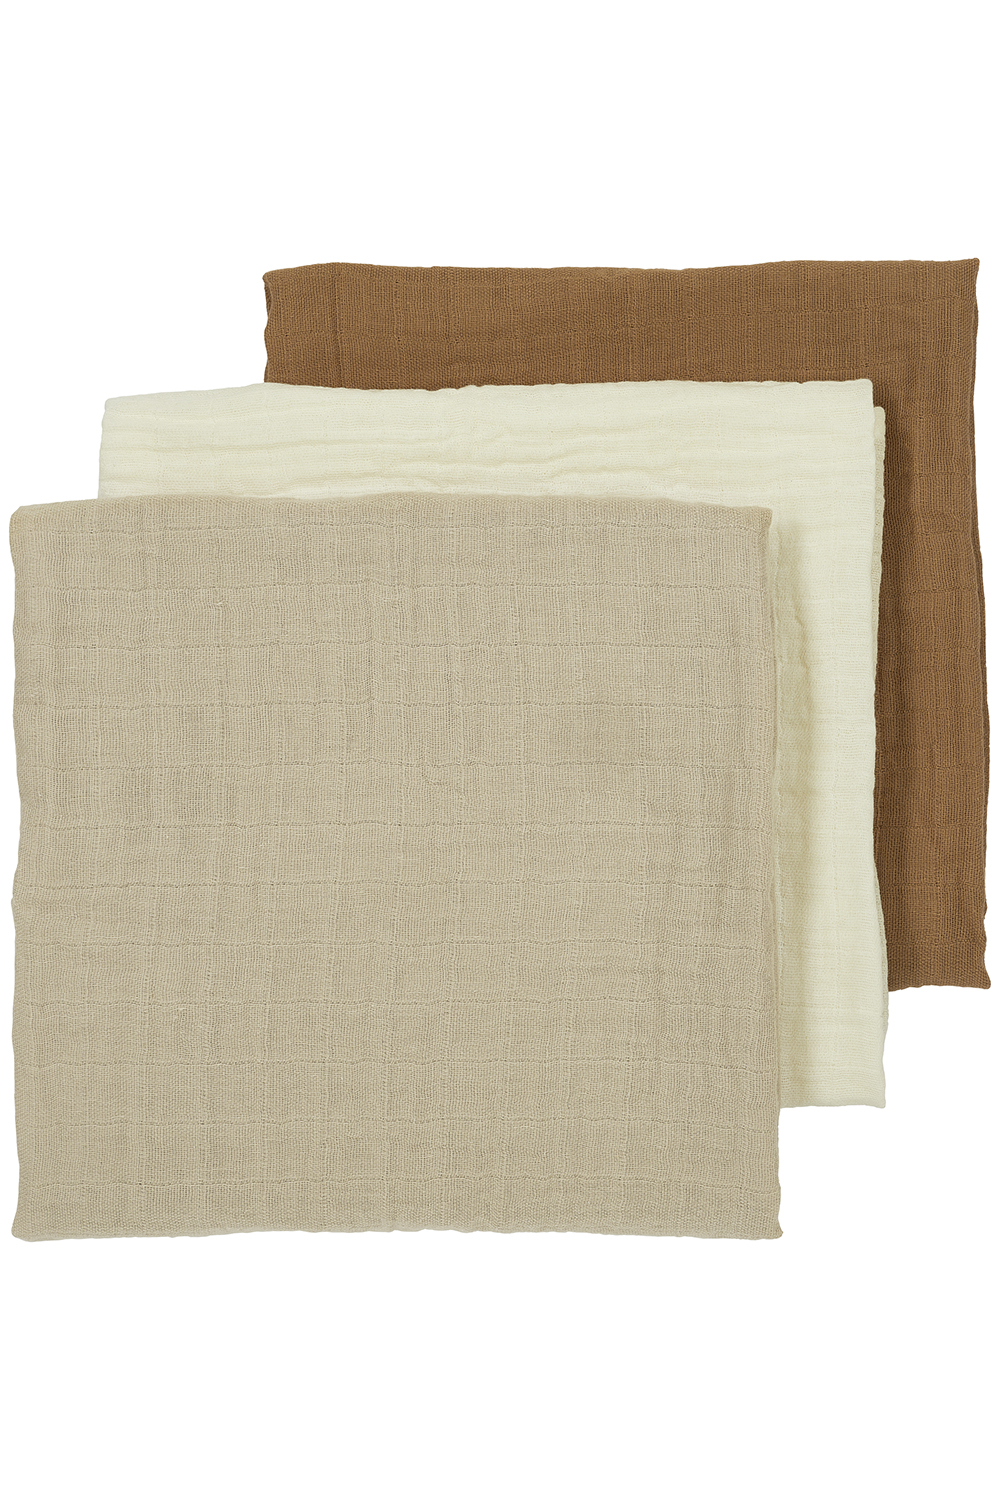 Pre-washed hydrofiele doeken 3-pack Uni - offwhite/sand/toffee - 70x70cm